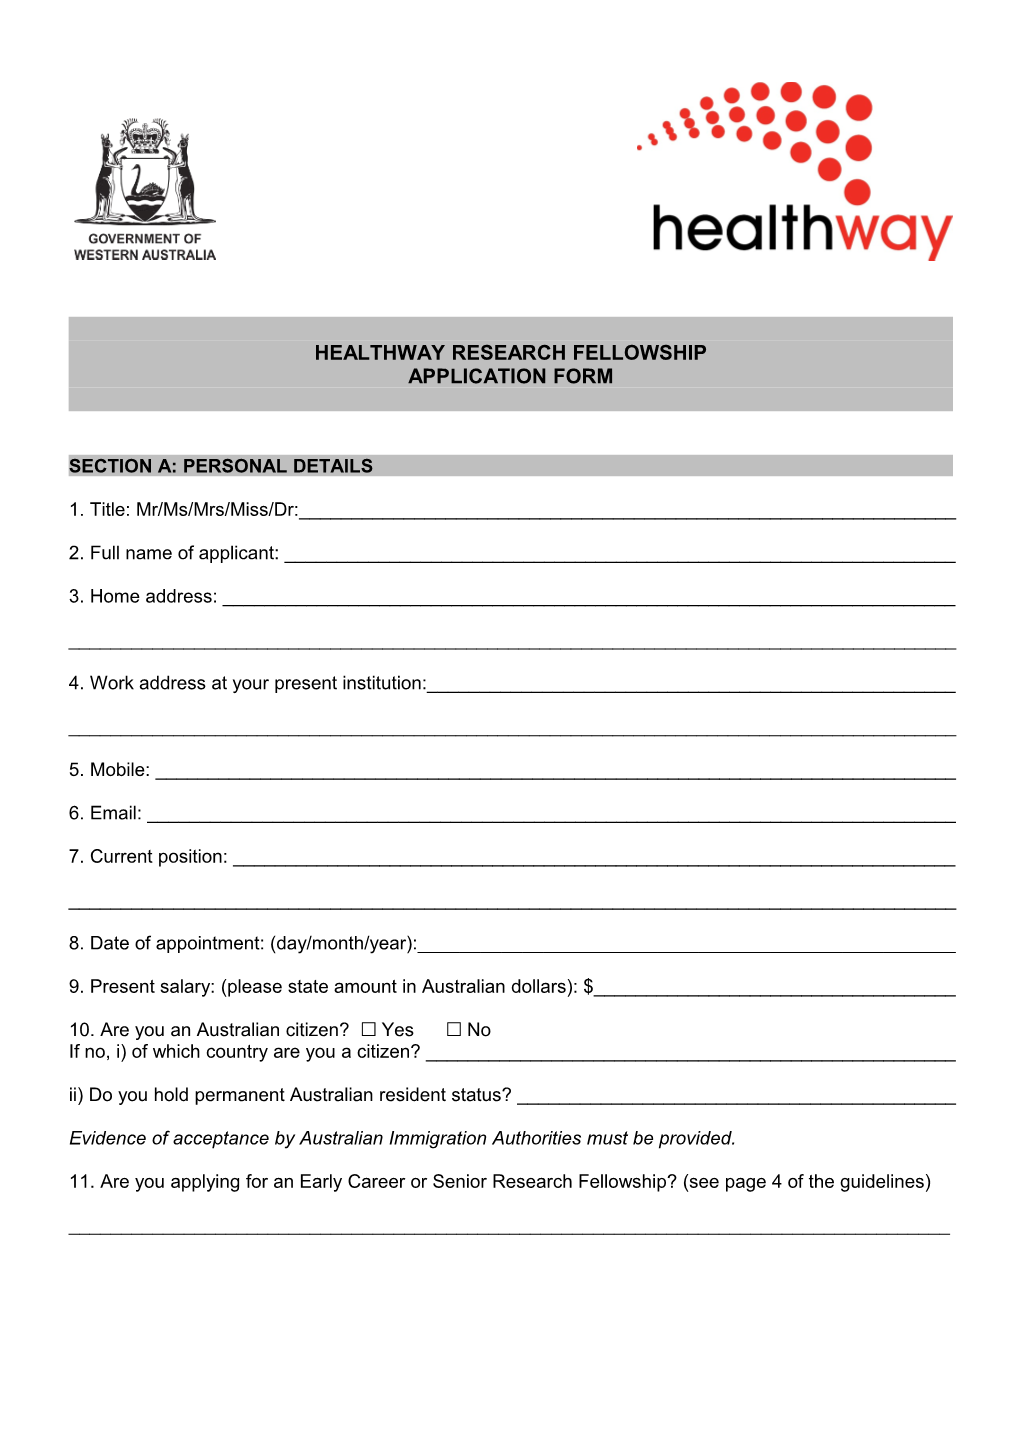 Healthway Research Fellowship